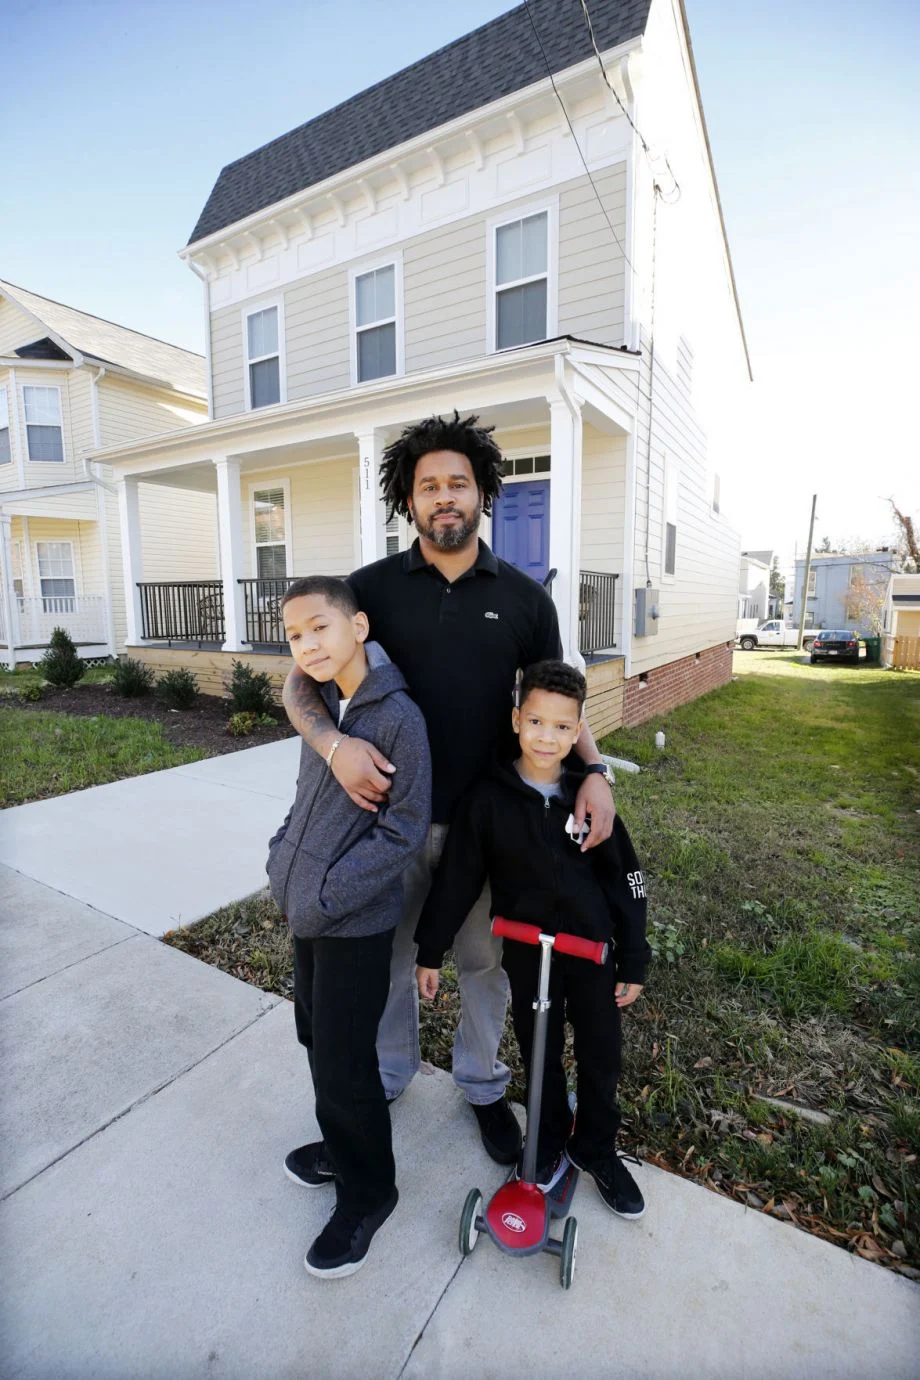 An owner of one of the land trust's homes poses in front of a home with two kids.